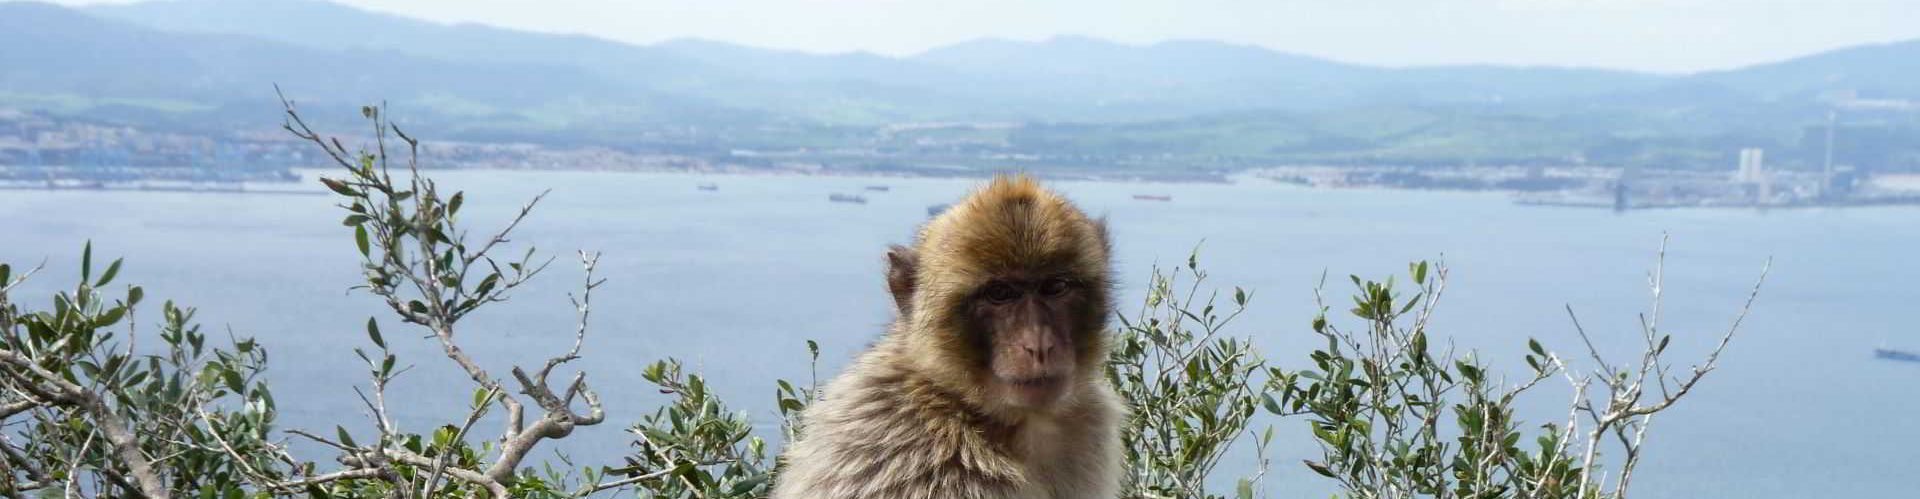 Barbary macaque sitting on railings, Gibraltar